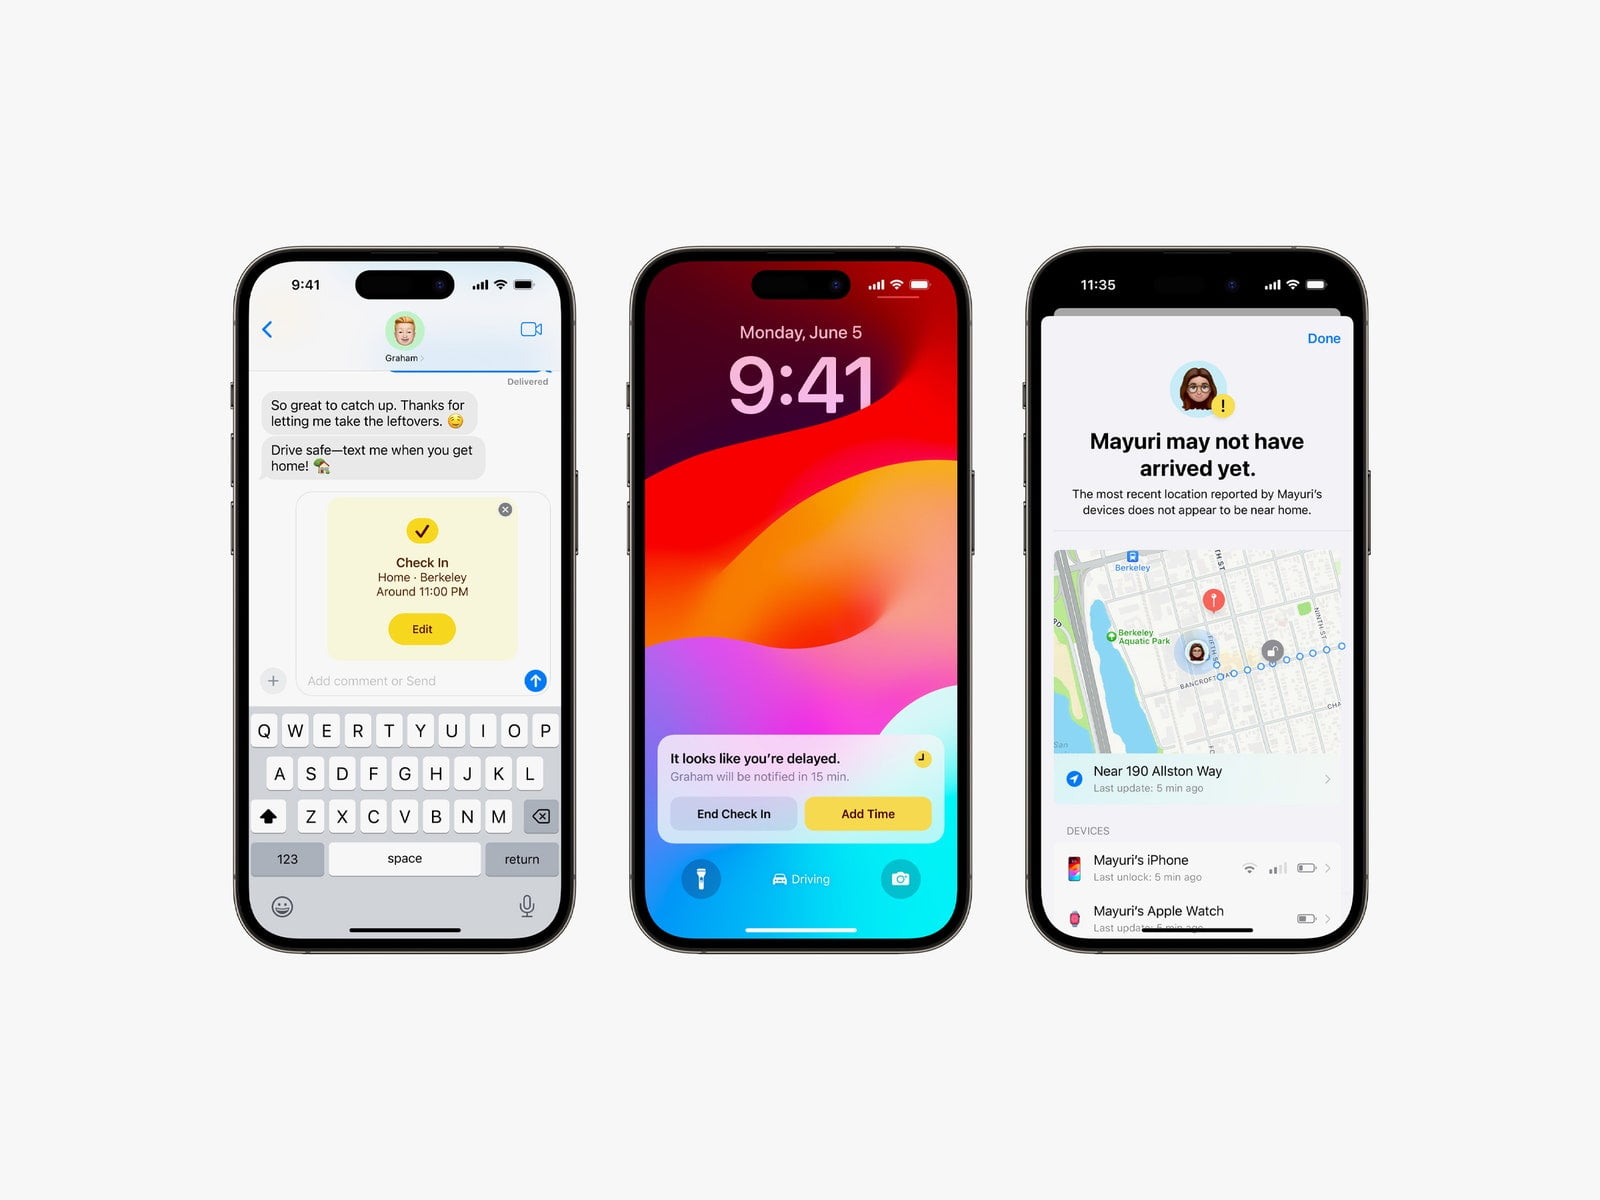 Apple iPhones displaying the new Messages app features